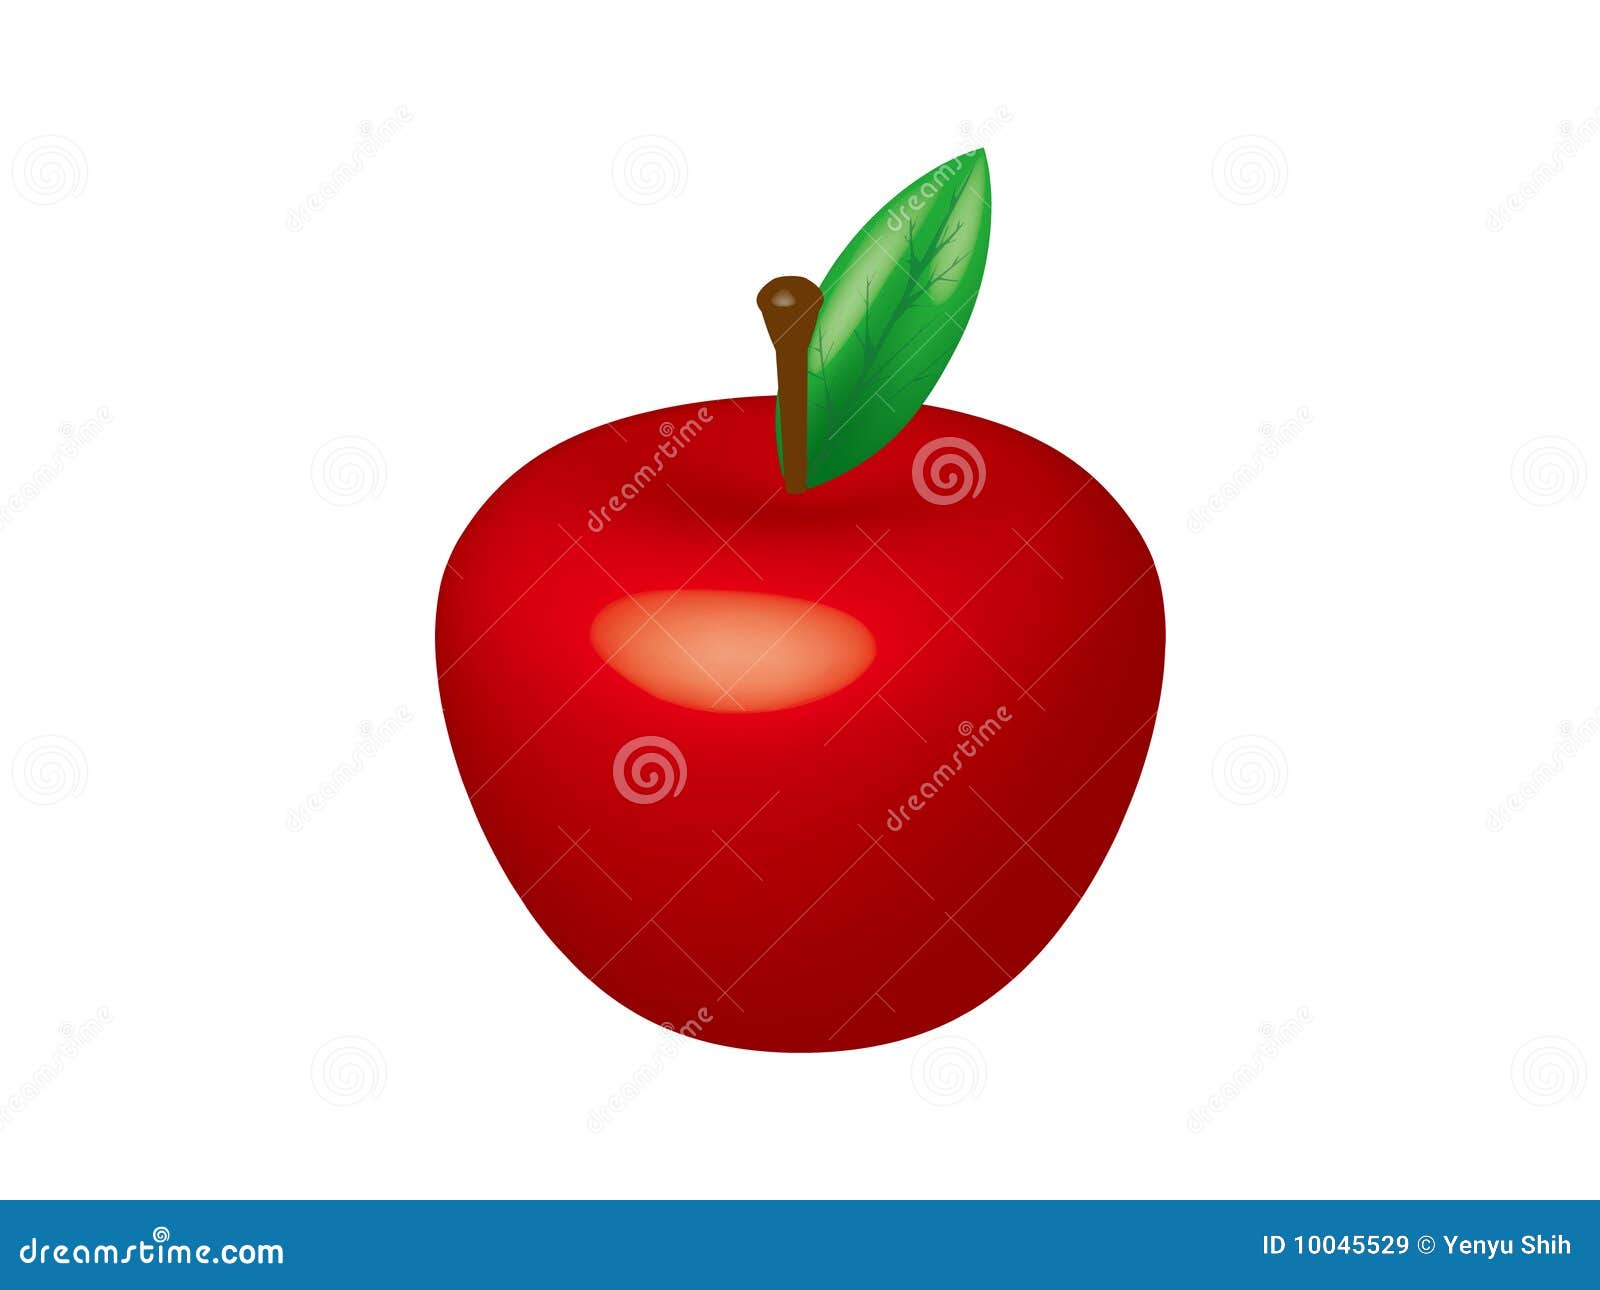 vector free download apple - photo #24